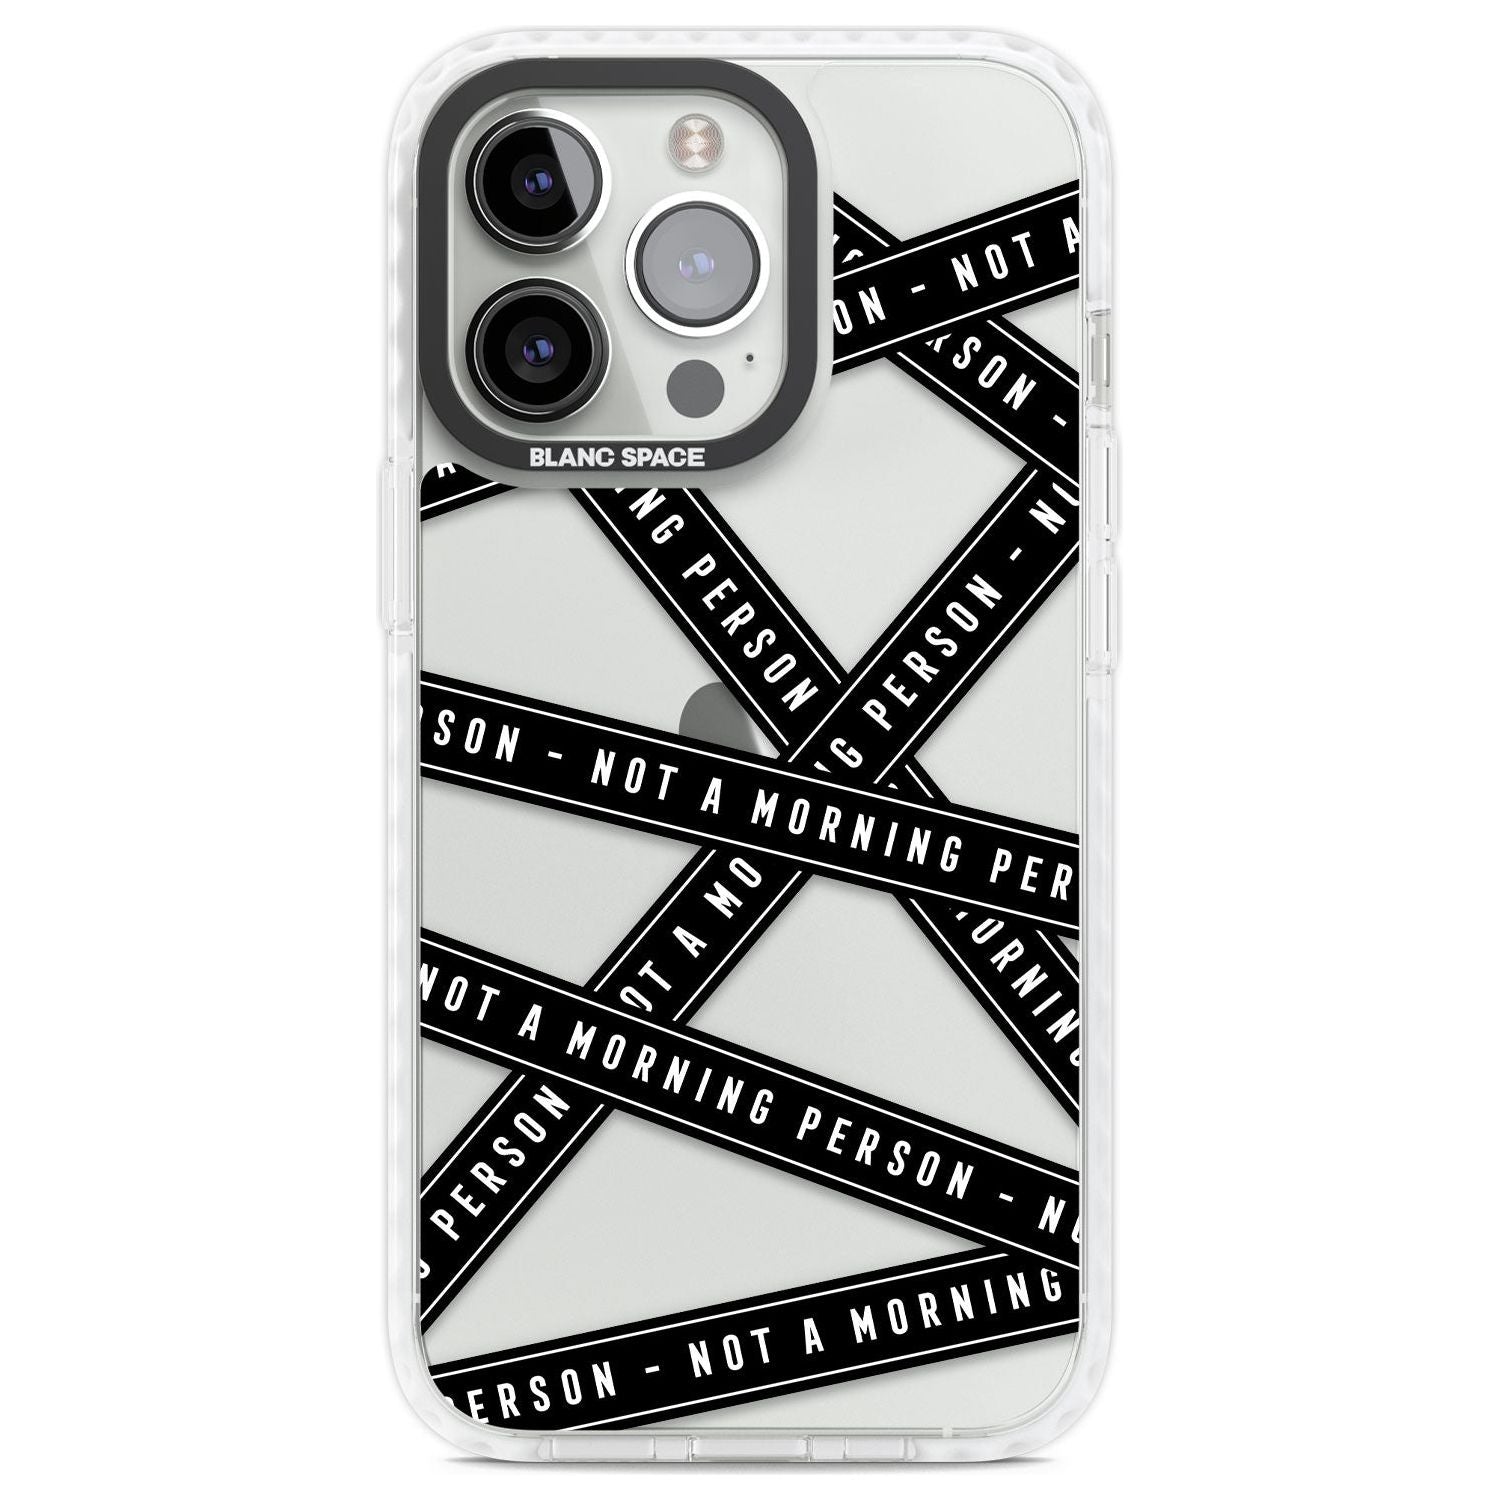 Caution Tape (Clear) Not a Morning Person Phone Case iPhone 13 Pro / Impact Case,iPhone 14 Pro / Impact Case,iPhone 15 Pro Max / Impact Case,iPhone 15 Pro / Impact Case Blanc Space